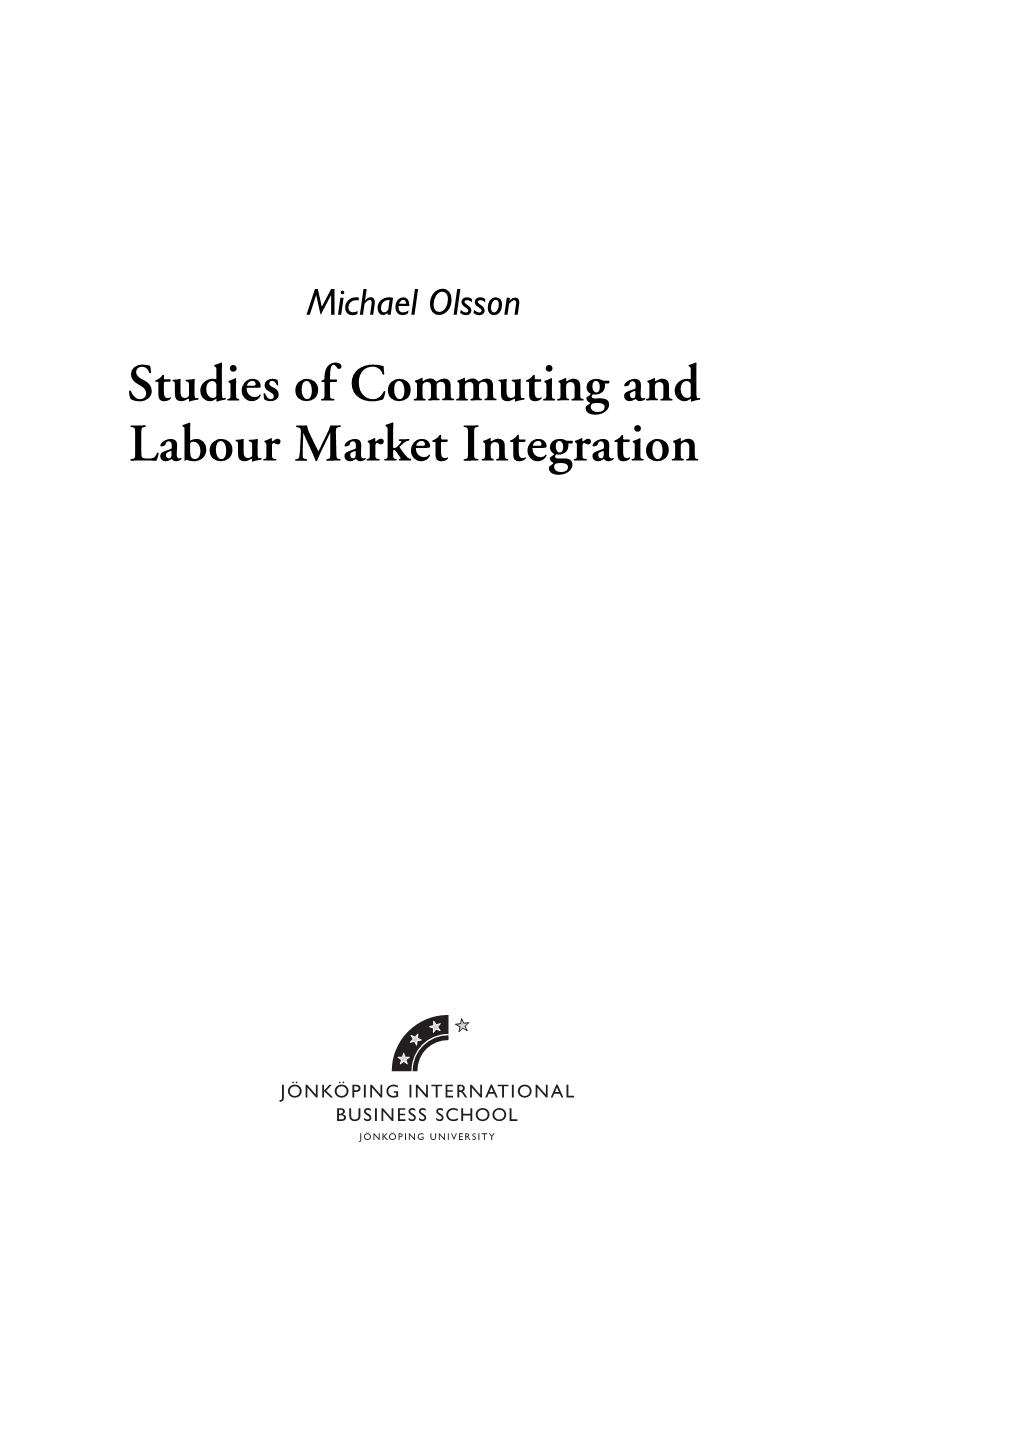 Studies of Commuting and Labour Market Integration